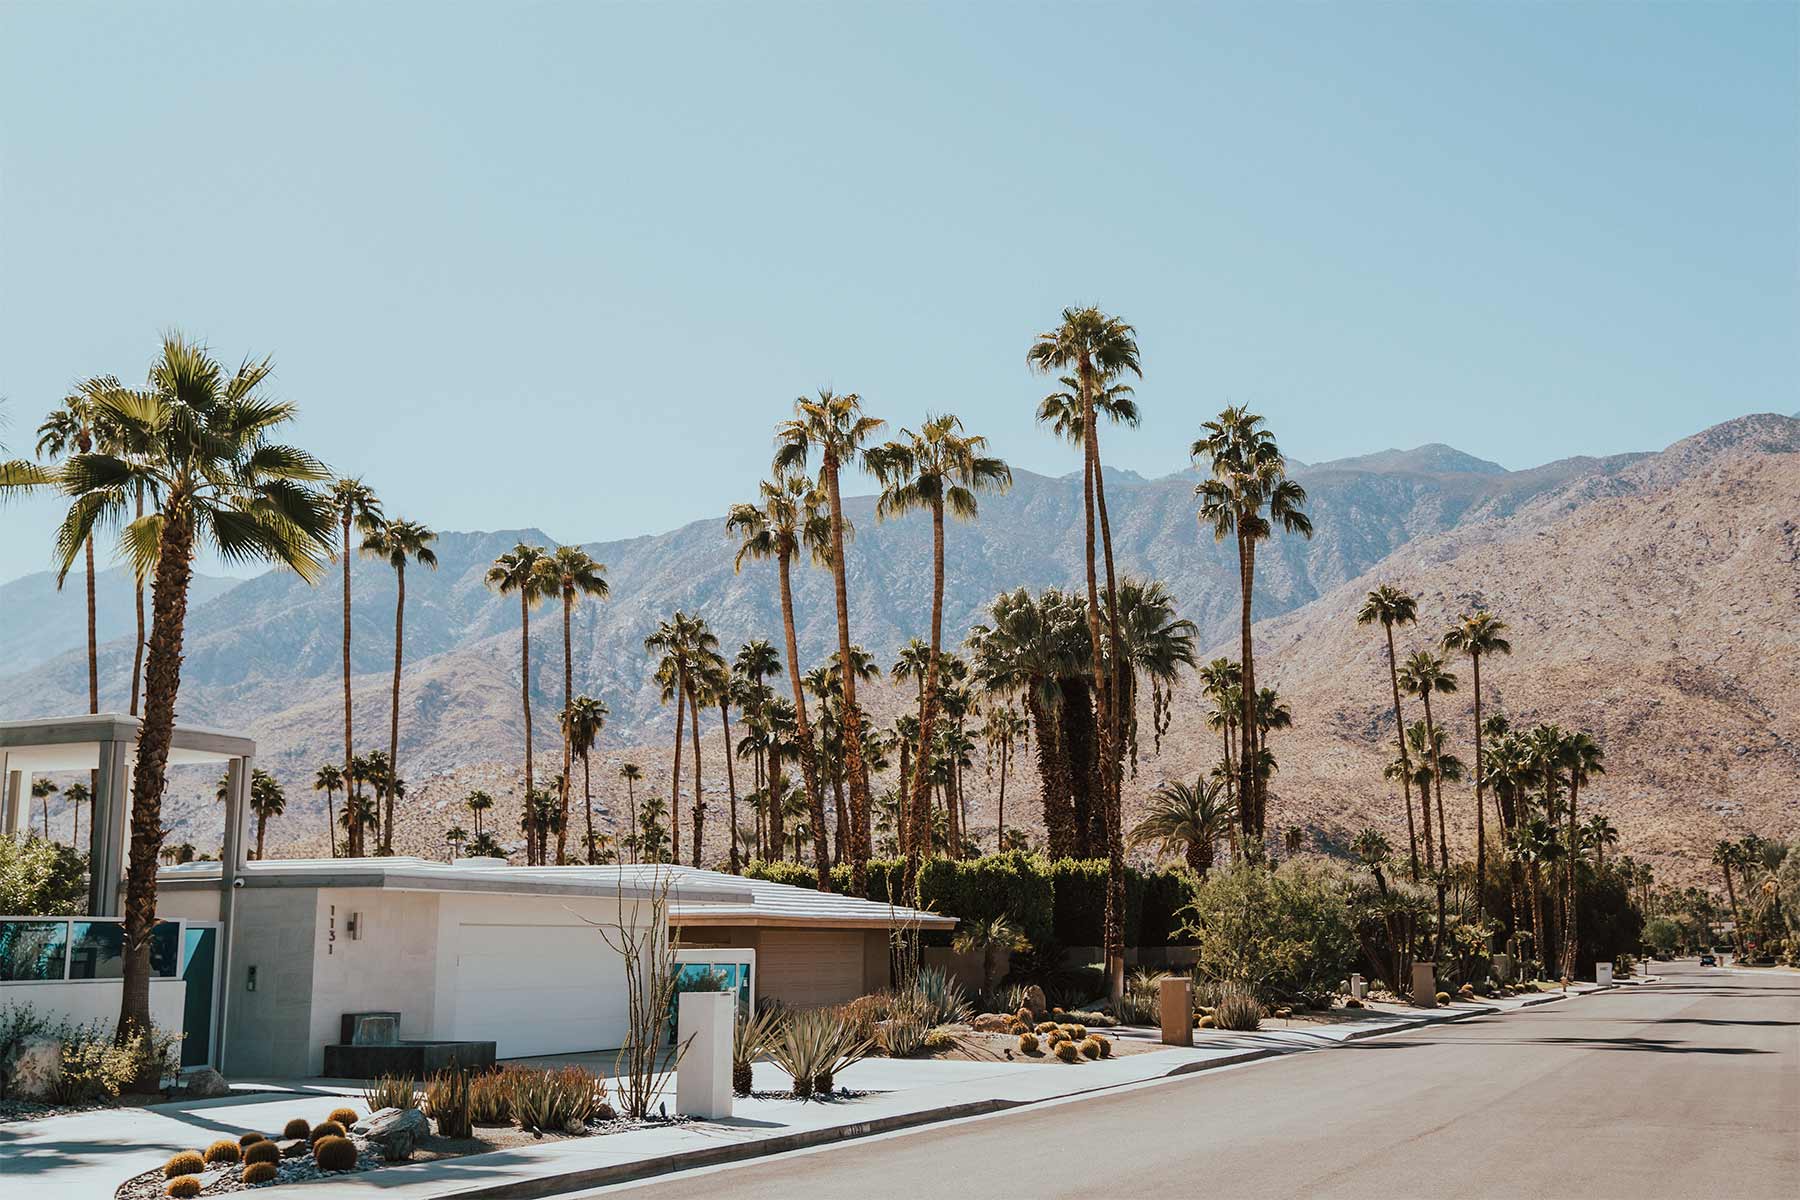 View of Palm Springs in California